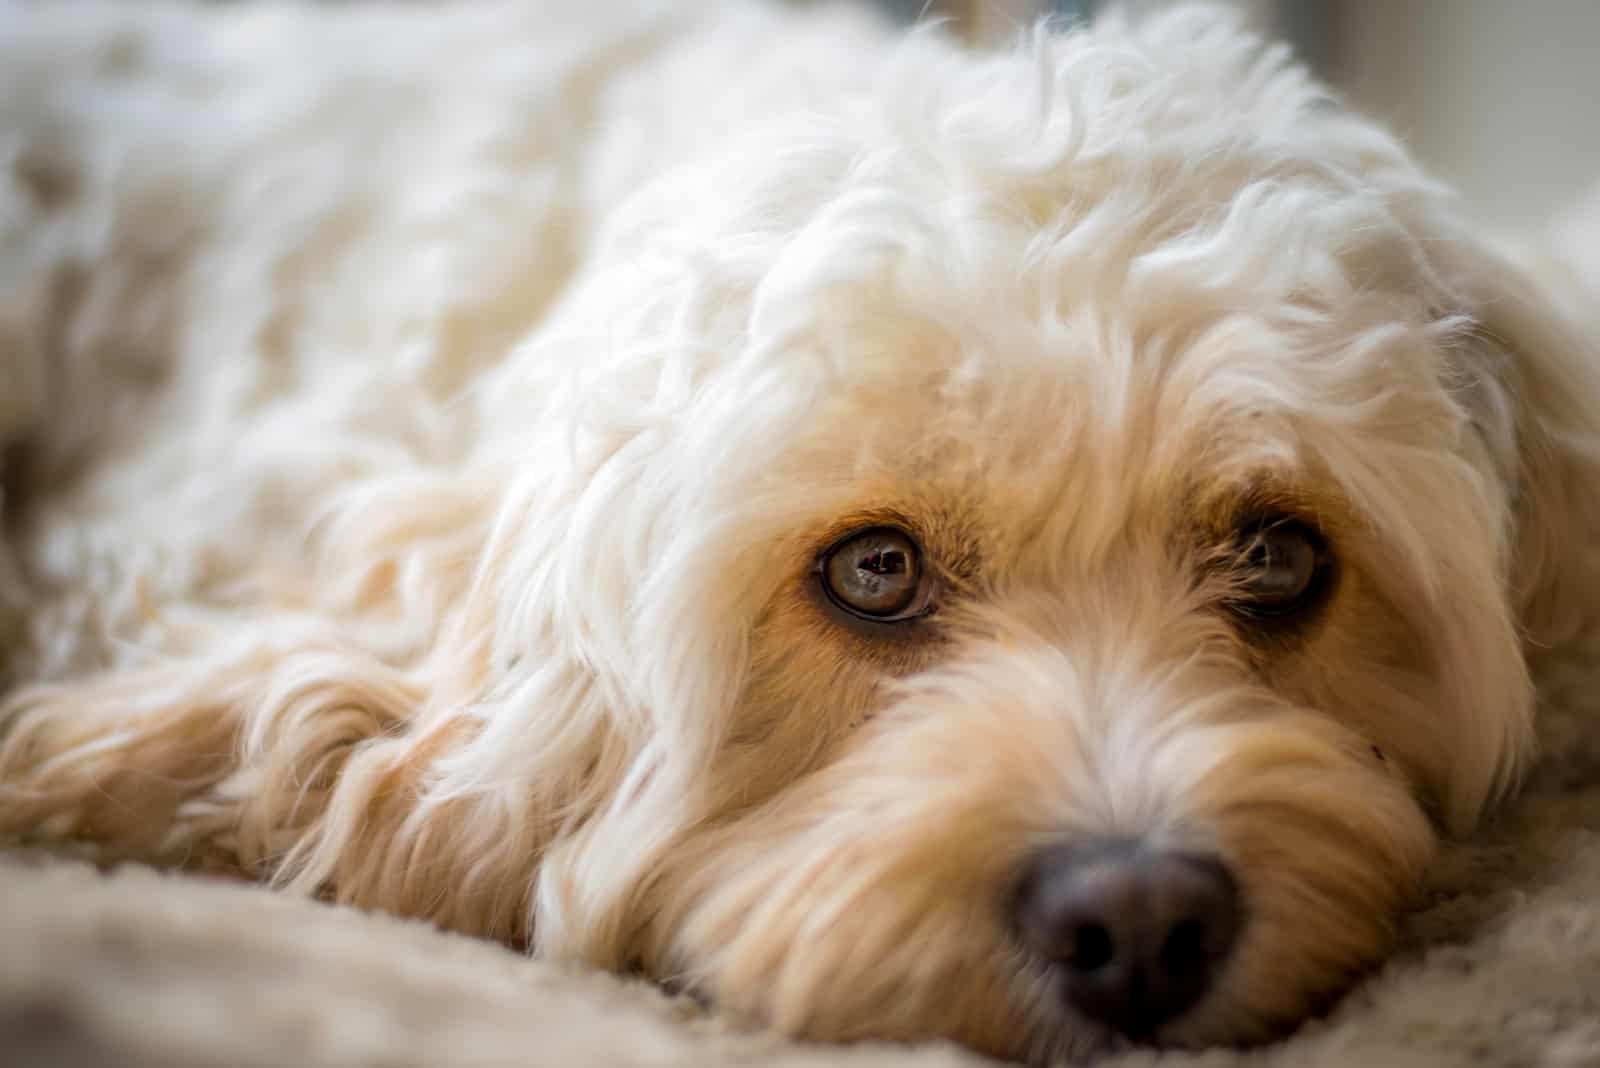 Cavapoo resting on bed